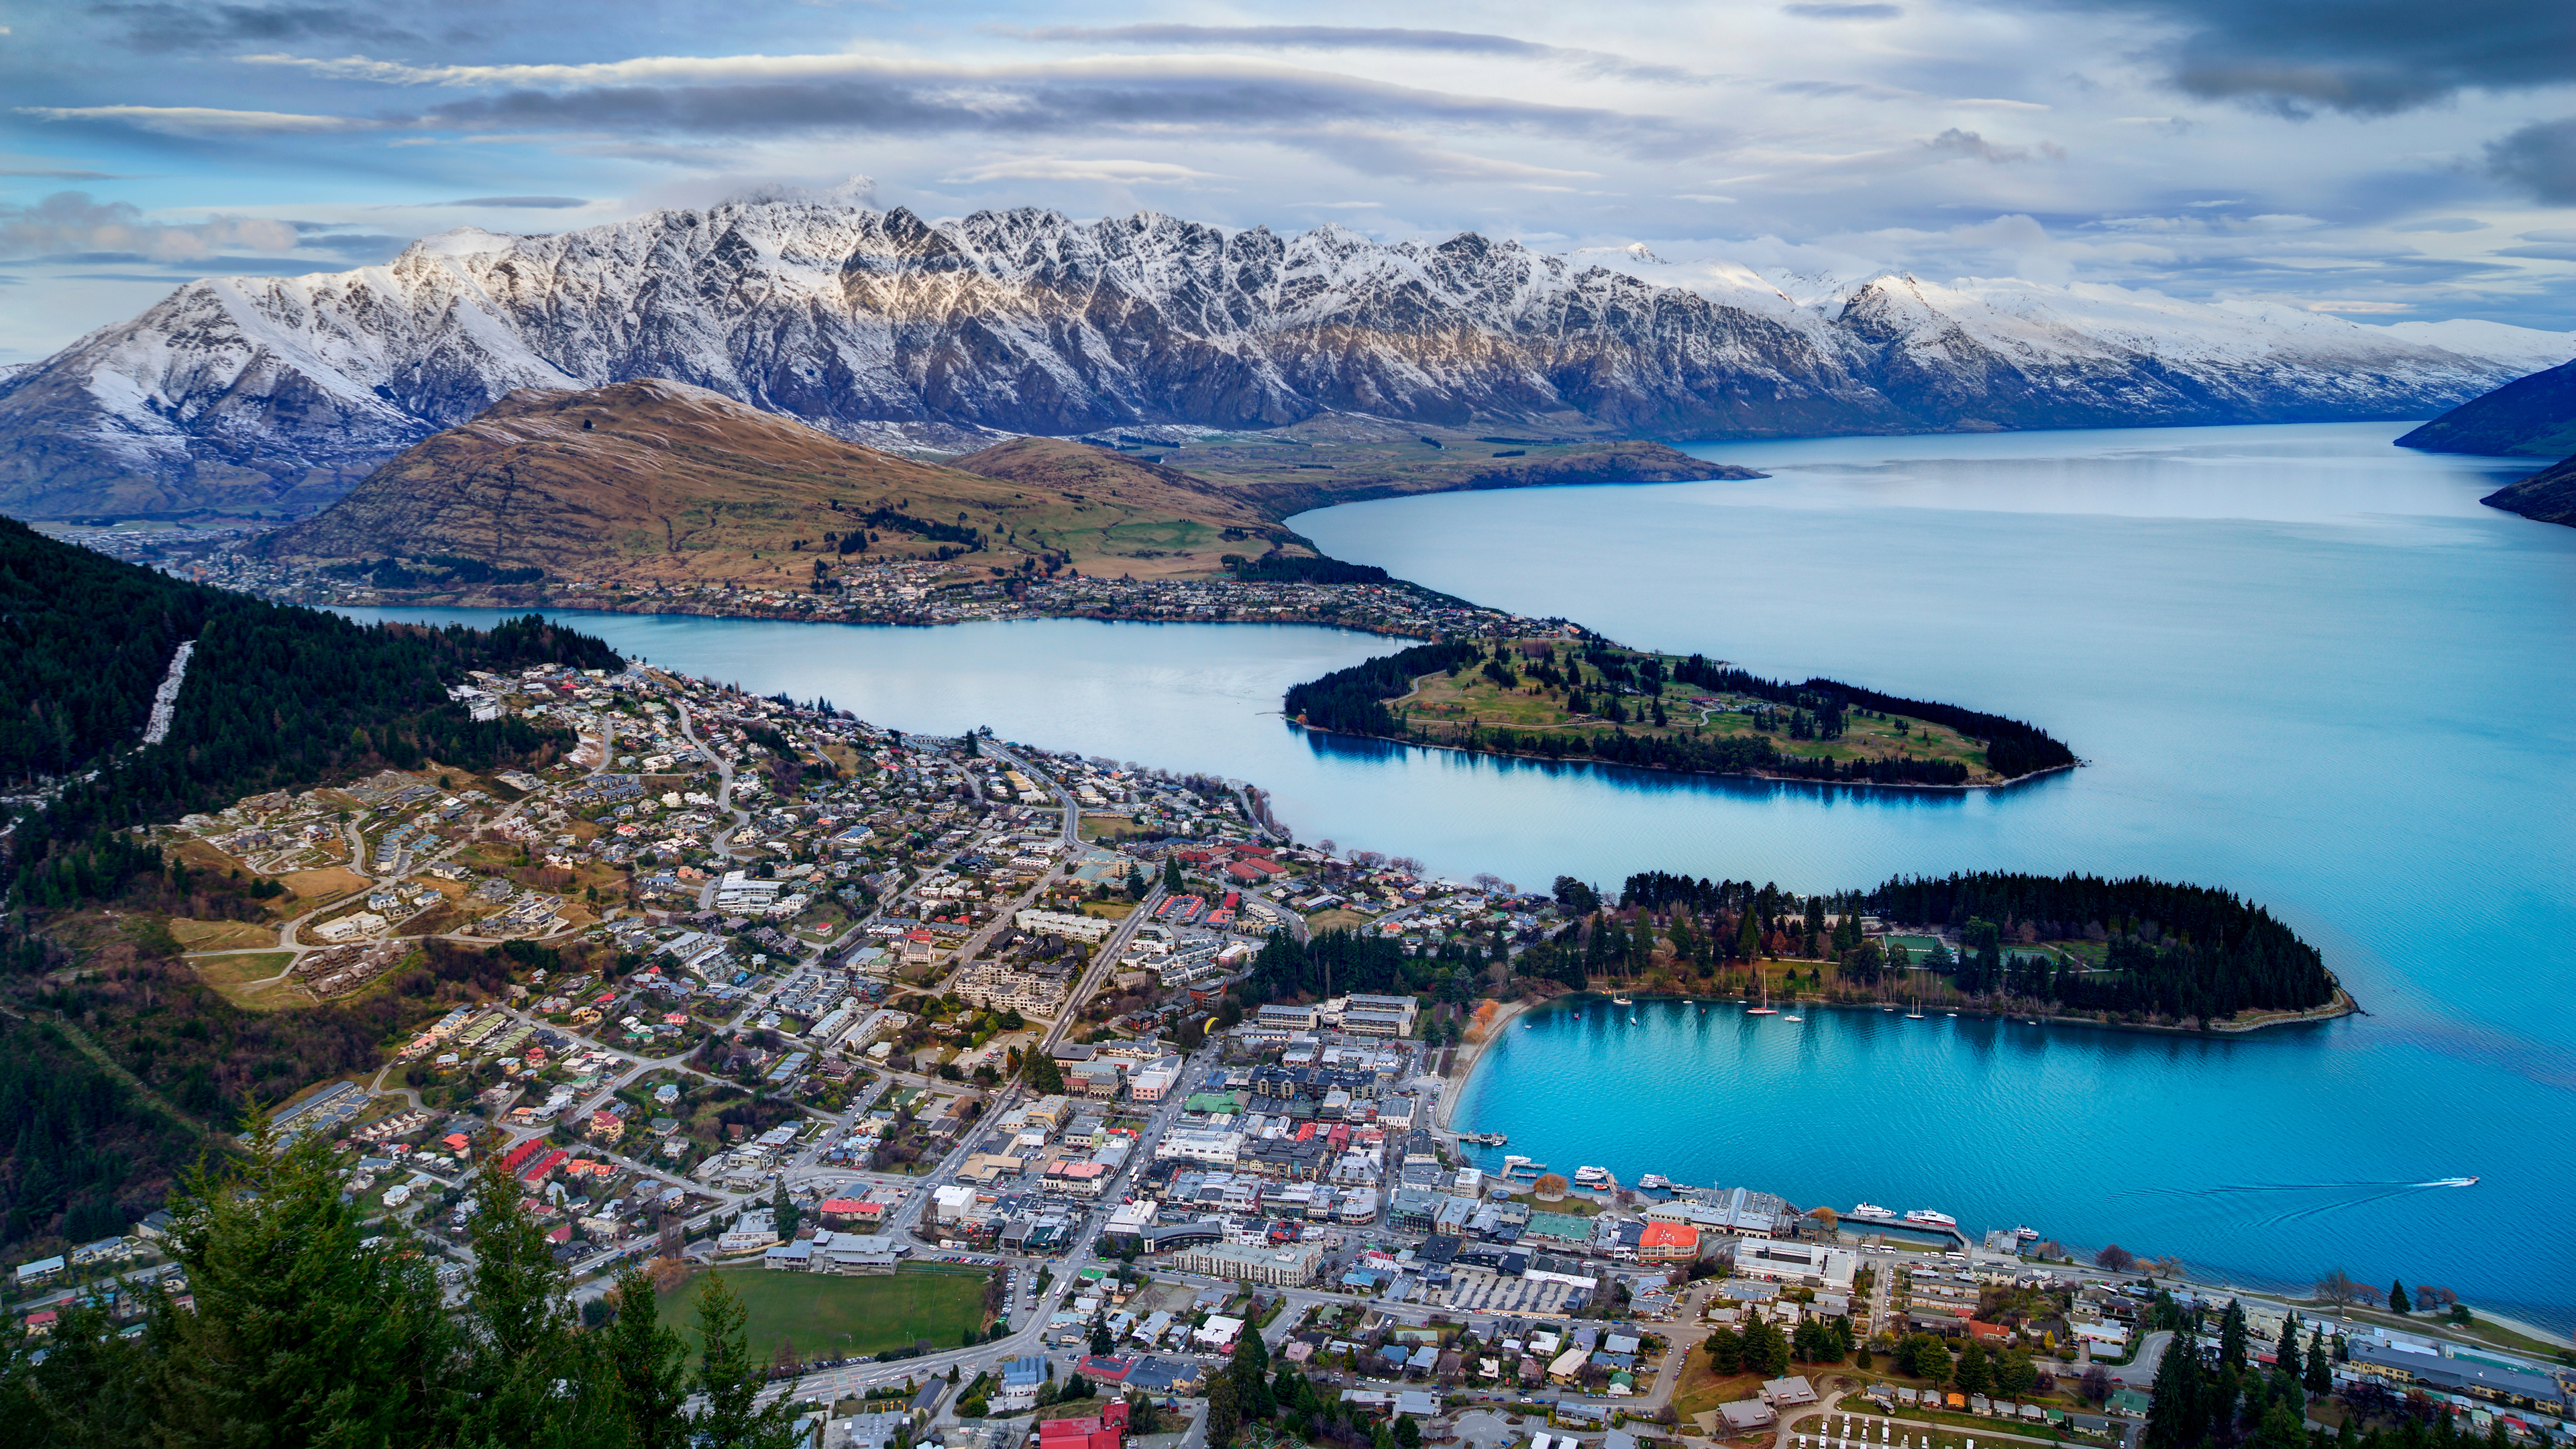 General 3840x2160 landscape 4K New Zealand cityscape nature snow mountains water city clouds